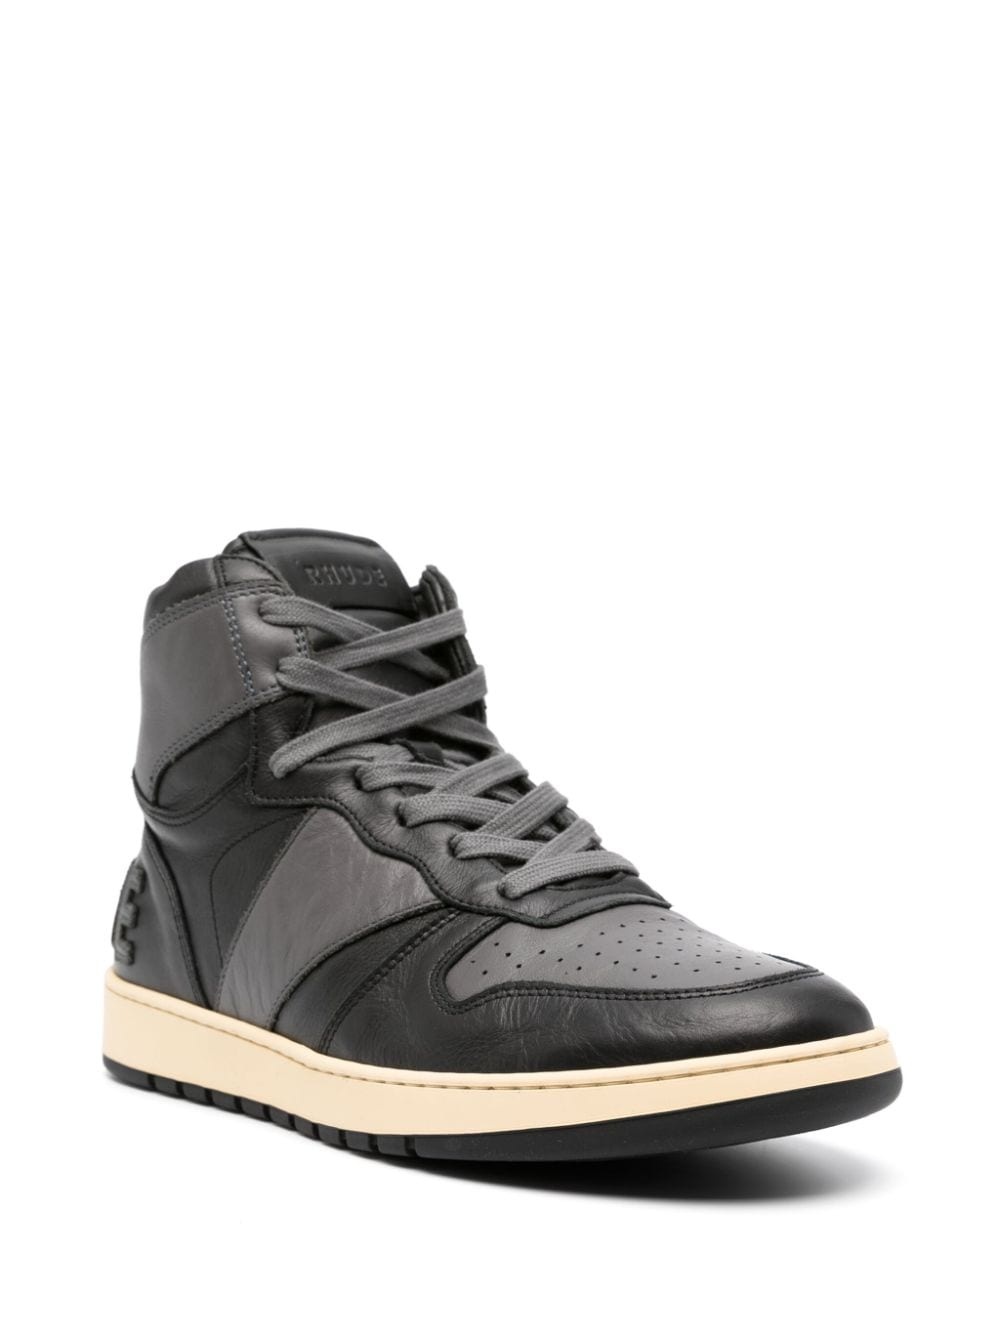 Rhude Rhecess high-top leather sneakers | REVERSIBLE